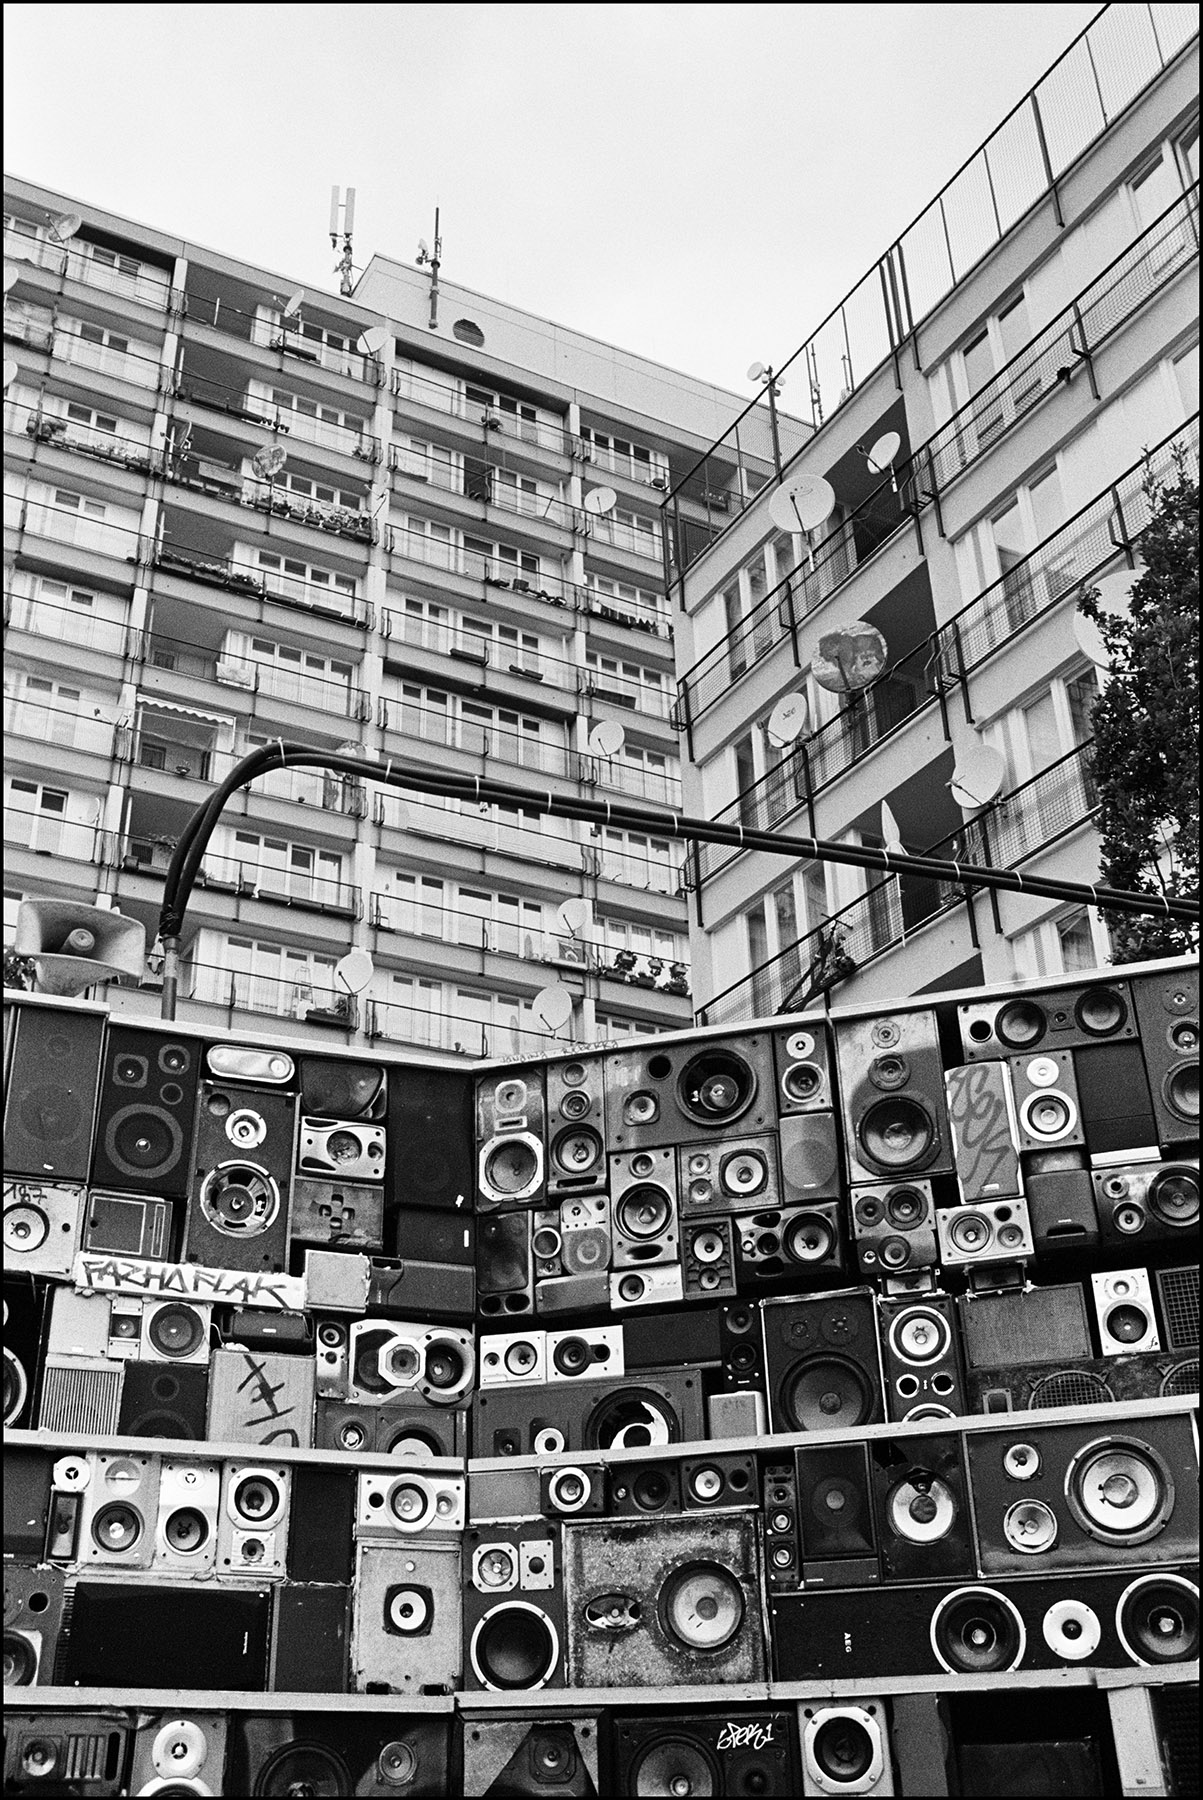 speakers in front of houses